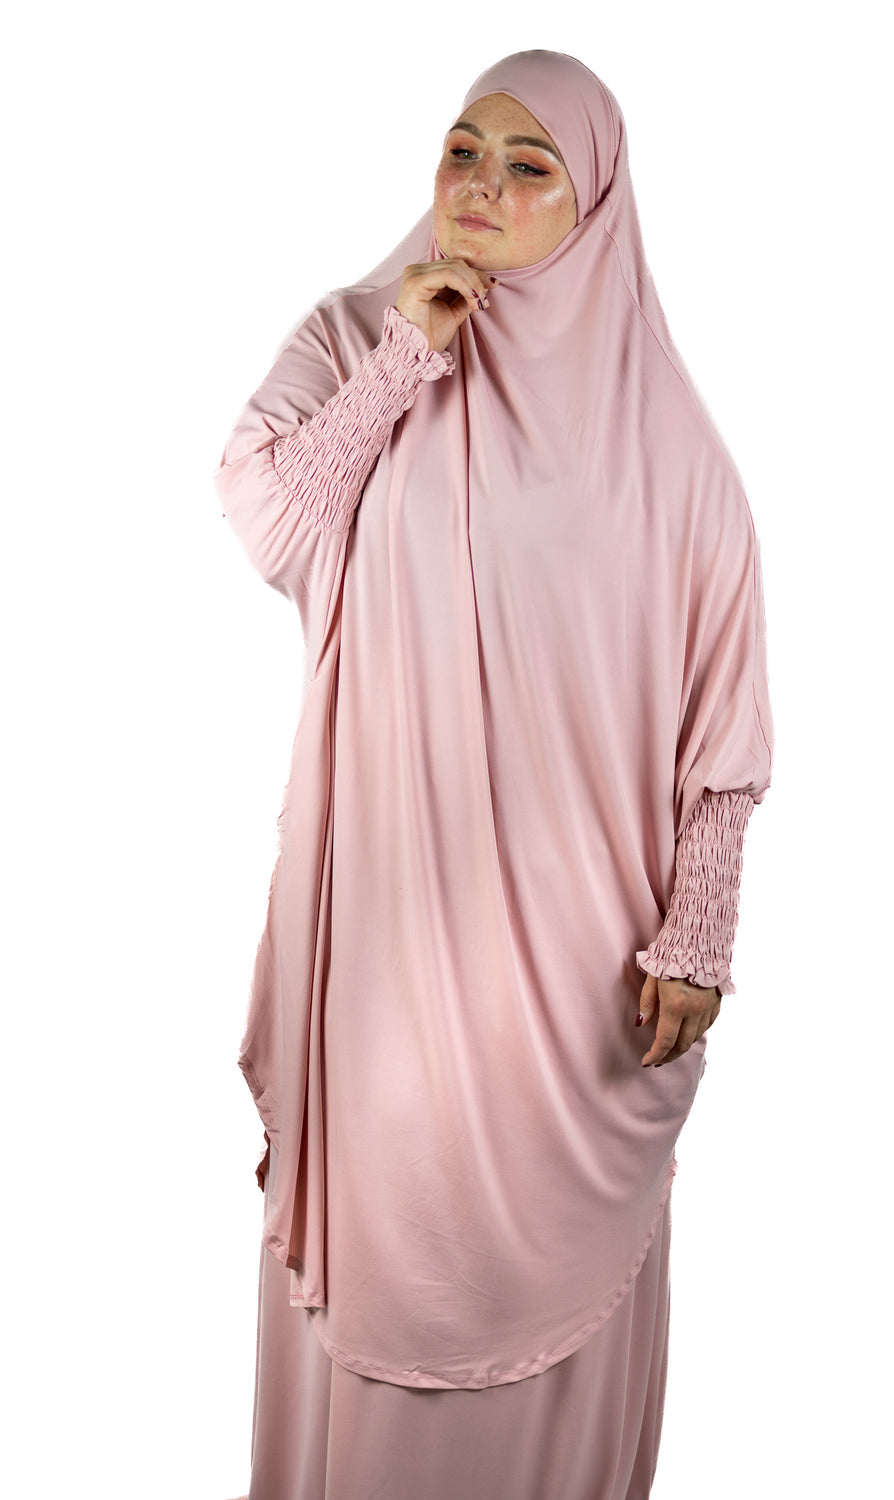 light pink stretchy two piece jilbab prayer set with adjustable hijab with tie and pockets and scrunched up sleeves and skirt